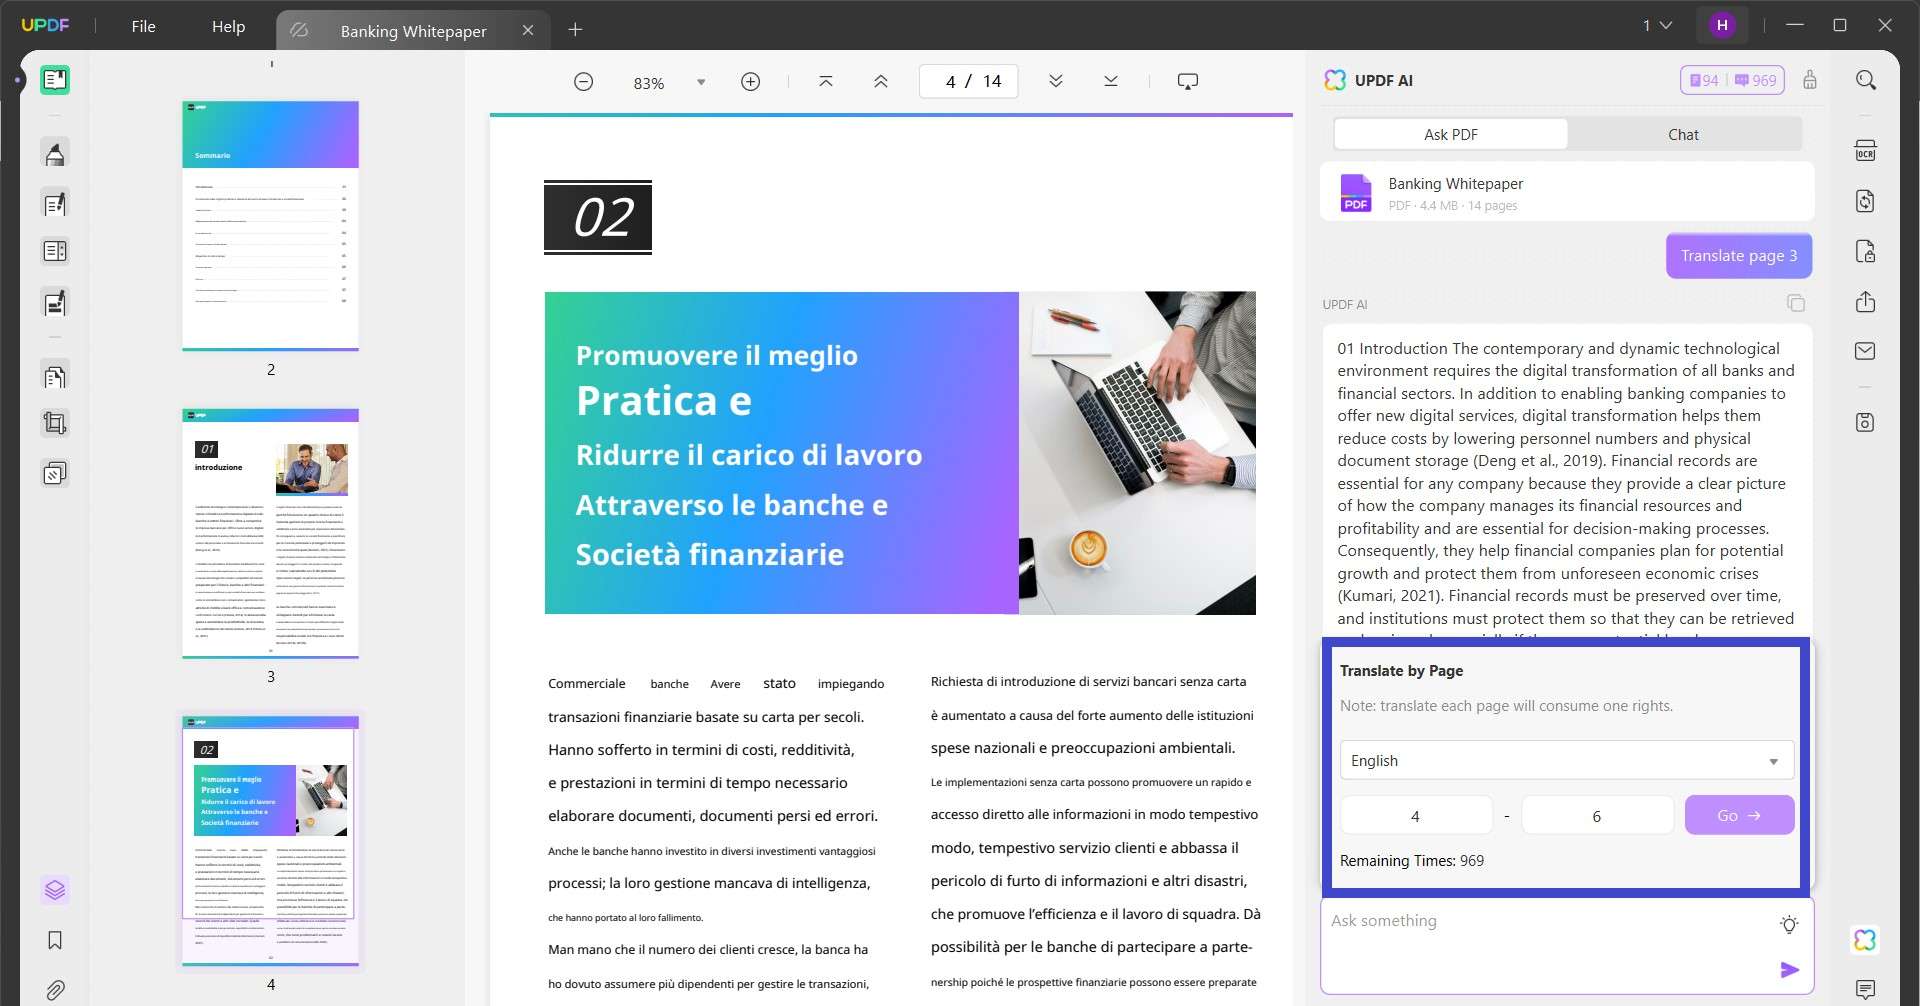 how to translate a pdf from italian to english translate by page